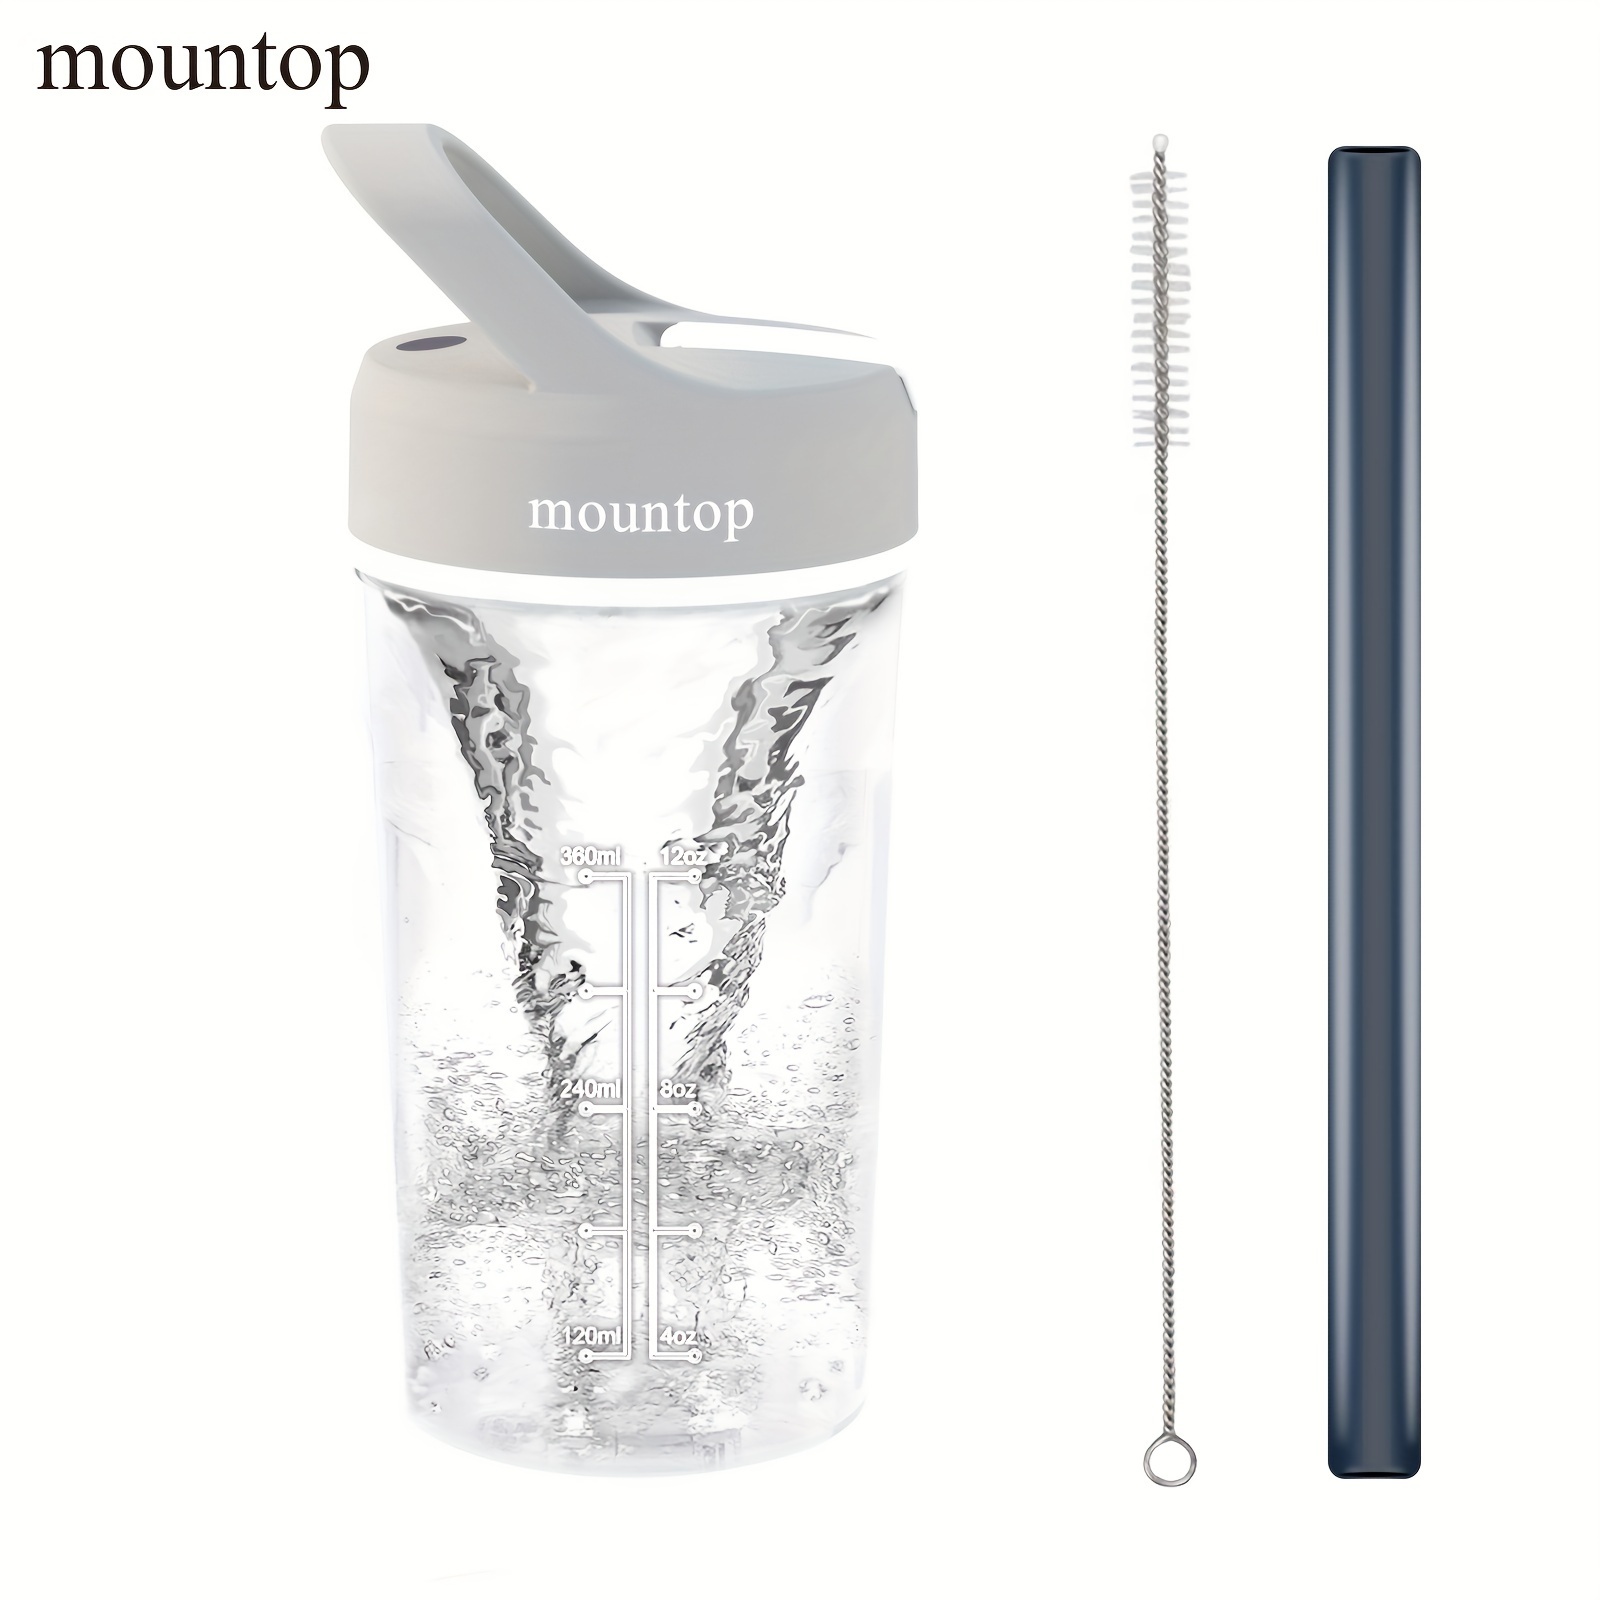 350ml Electric Protein Shaker Mixing Cup Automatic Self Stirring Water  Bottle Mixer One-button Switch Drinkware for Fitness Gym